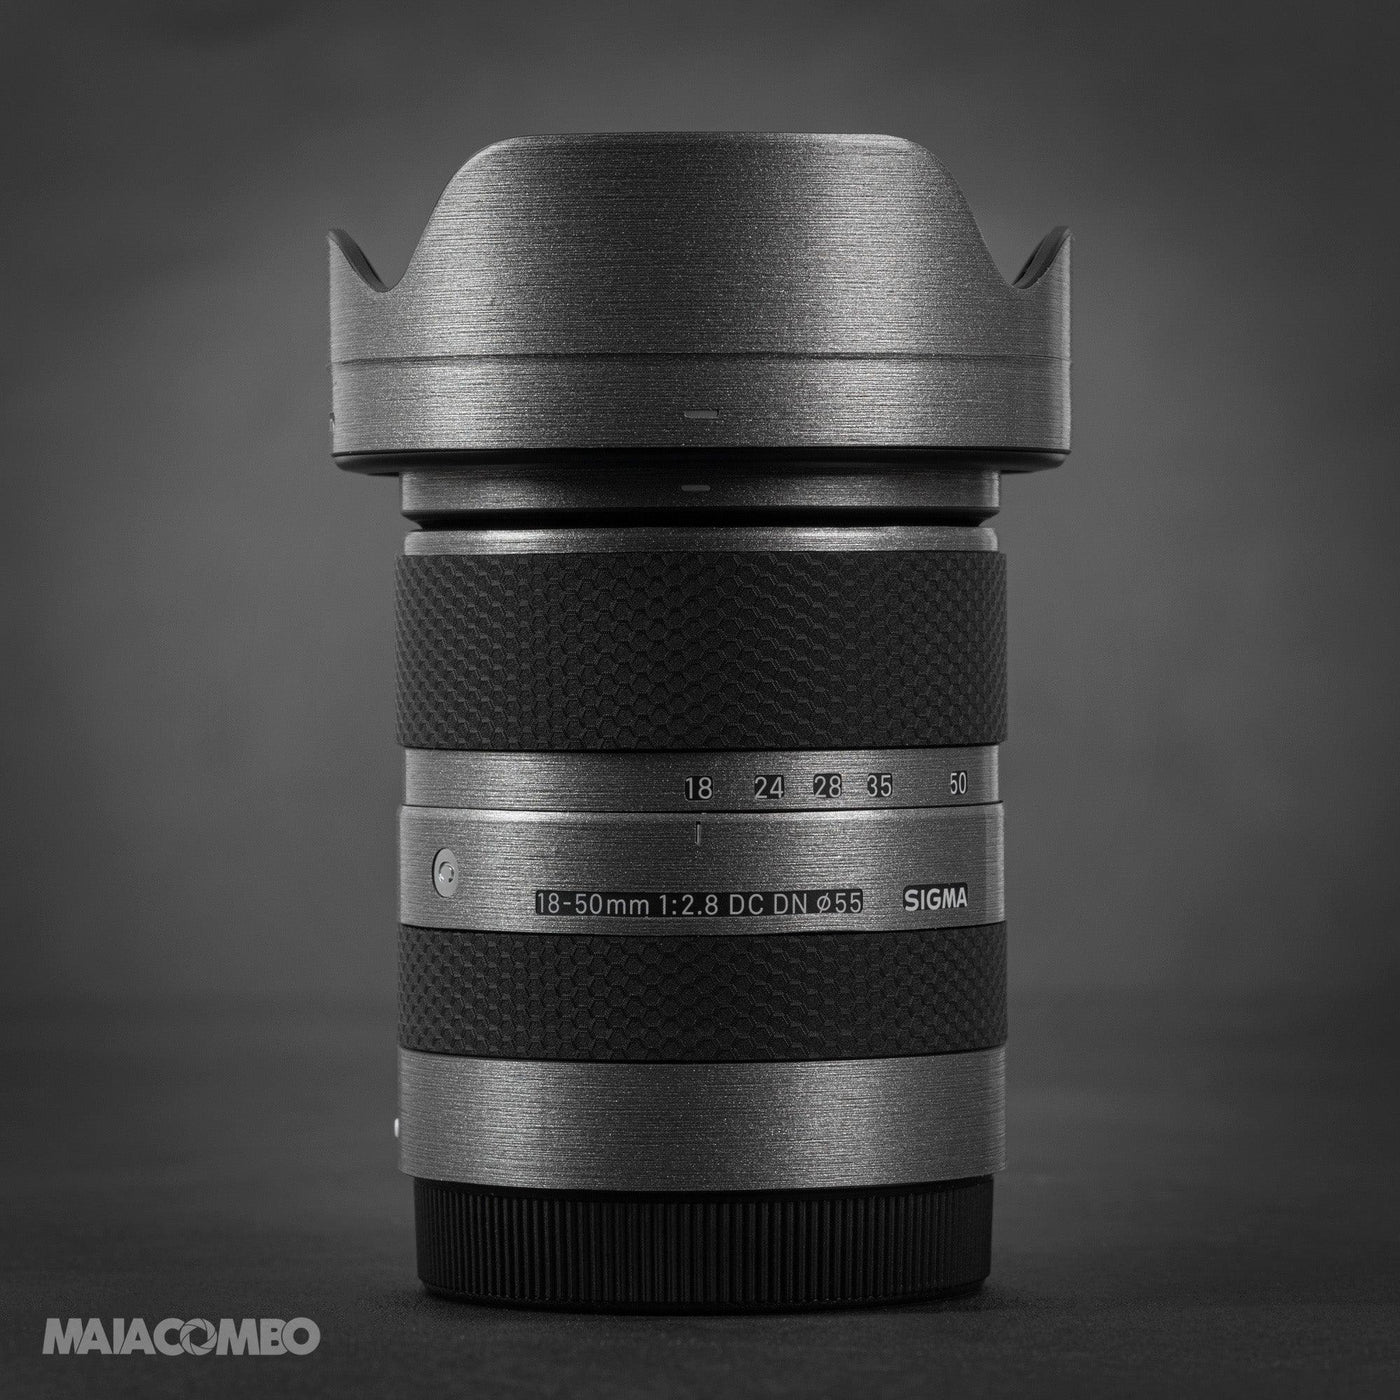 SIGMA 18-50mm F2.8 DC DN Lens Skin For SONY - MAIACOMBO